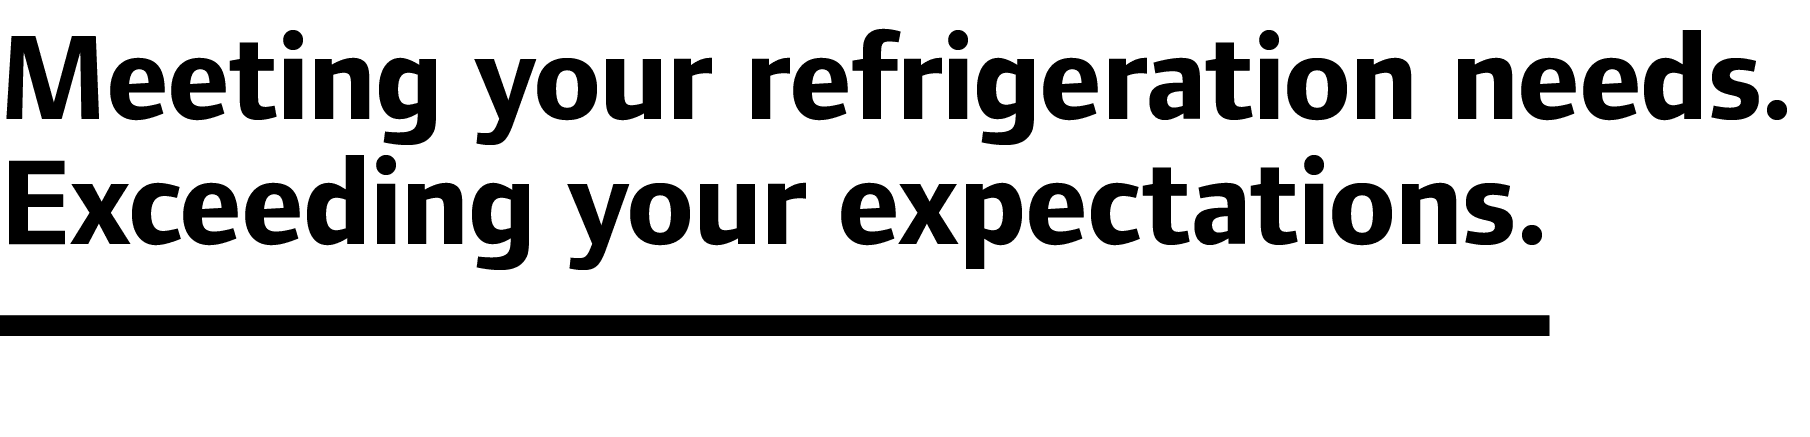 Meeting your refrigeration needs. Exceeding your expectations. 